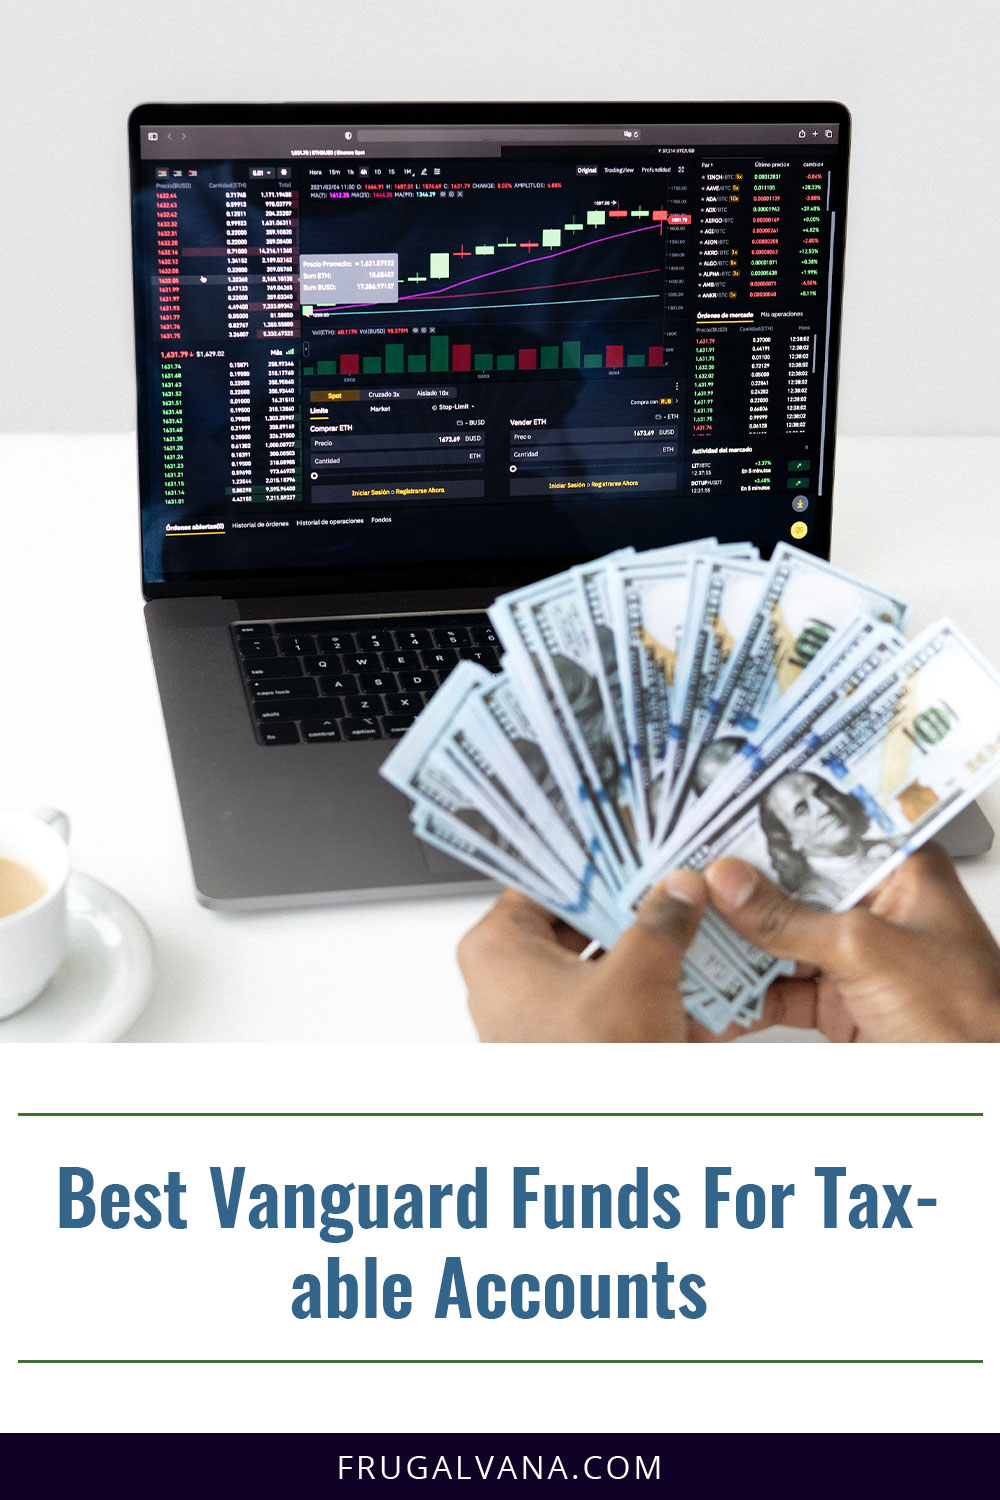 Best Vanguard Funds For Taxable Accounts